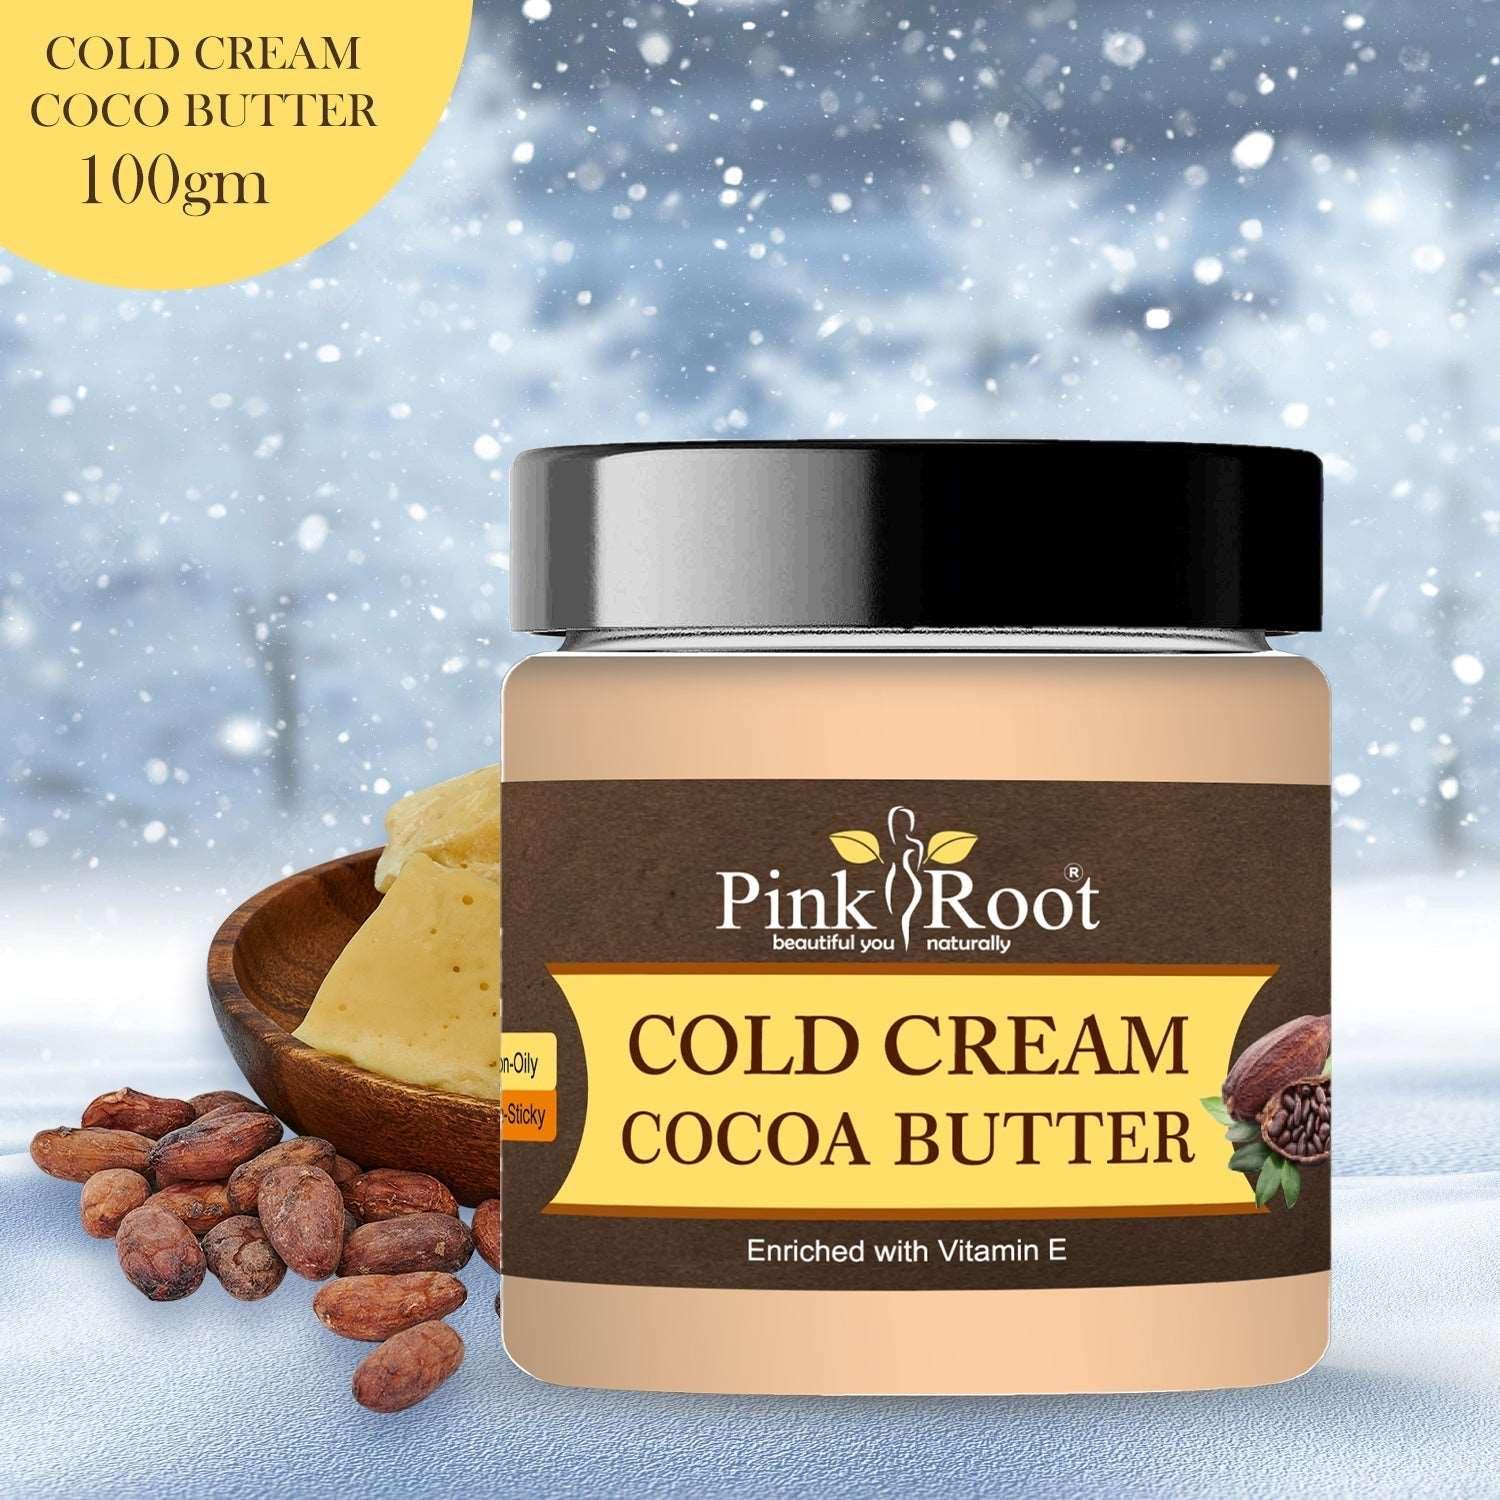 Cold Cream with Cocoa Butter 100gm (Pack of 2)